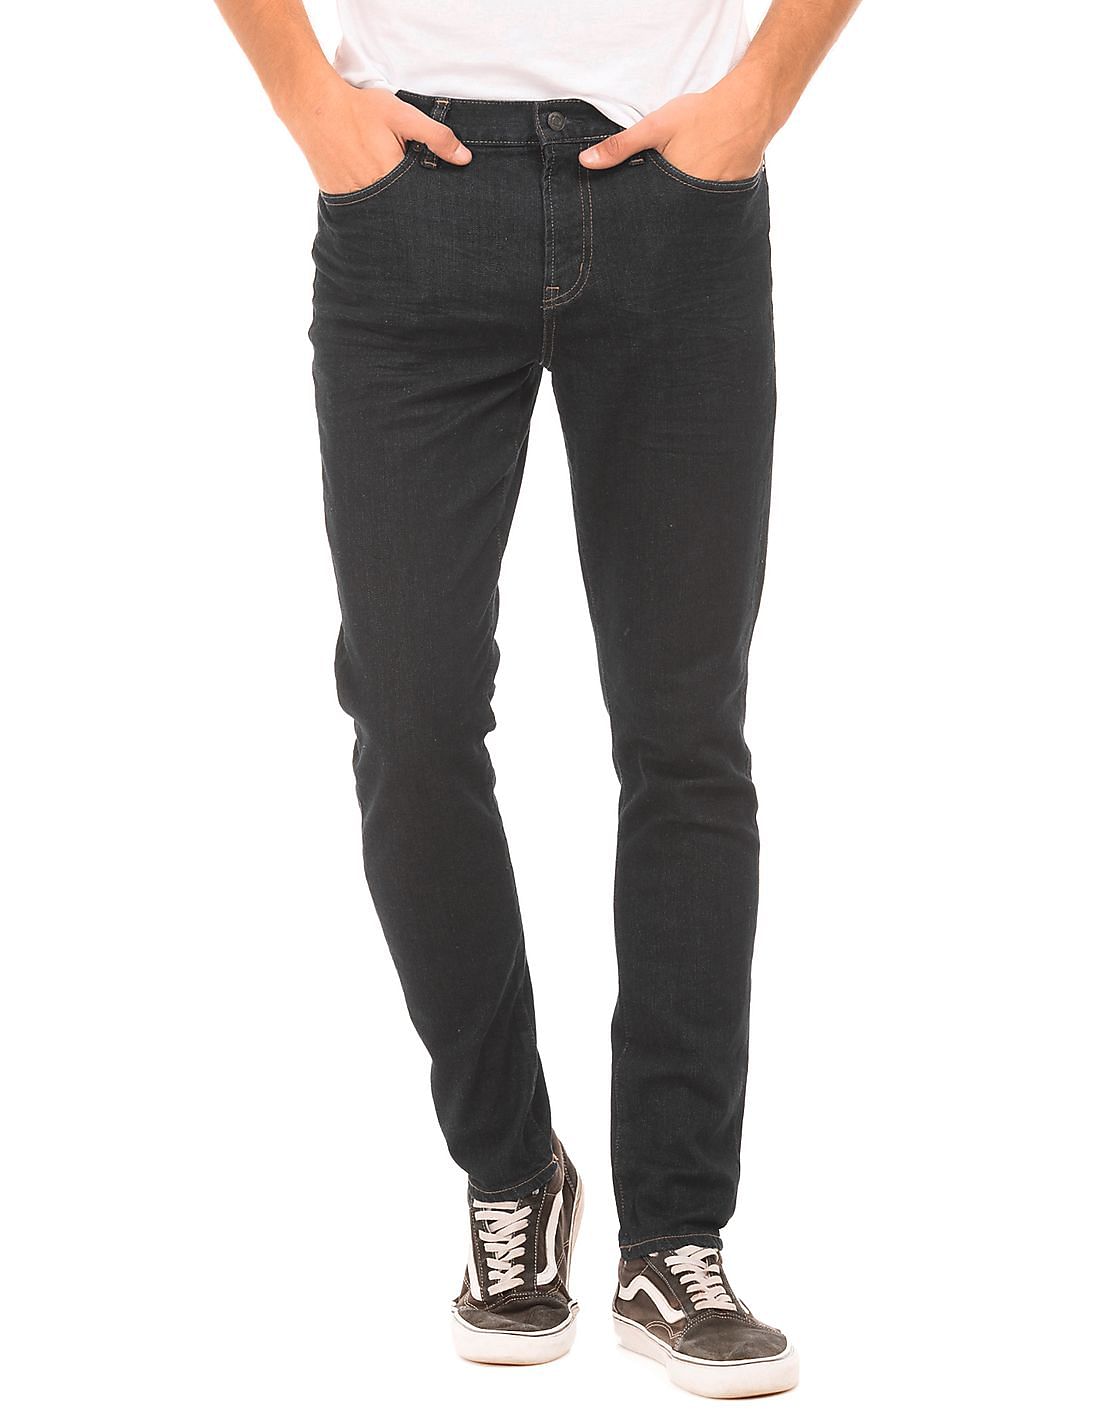 Buy Aeropostale Men Mid Rise Skinny Tapered Jeans - NNNOW.com